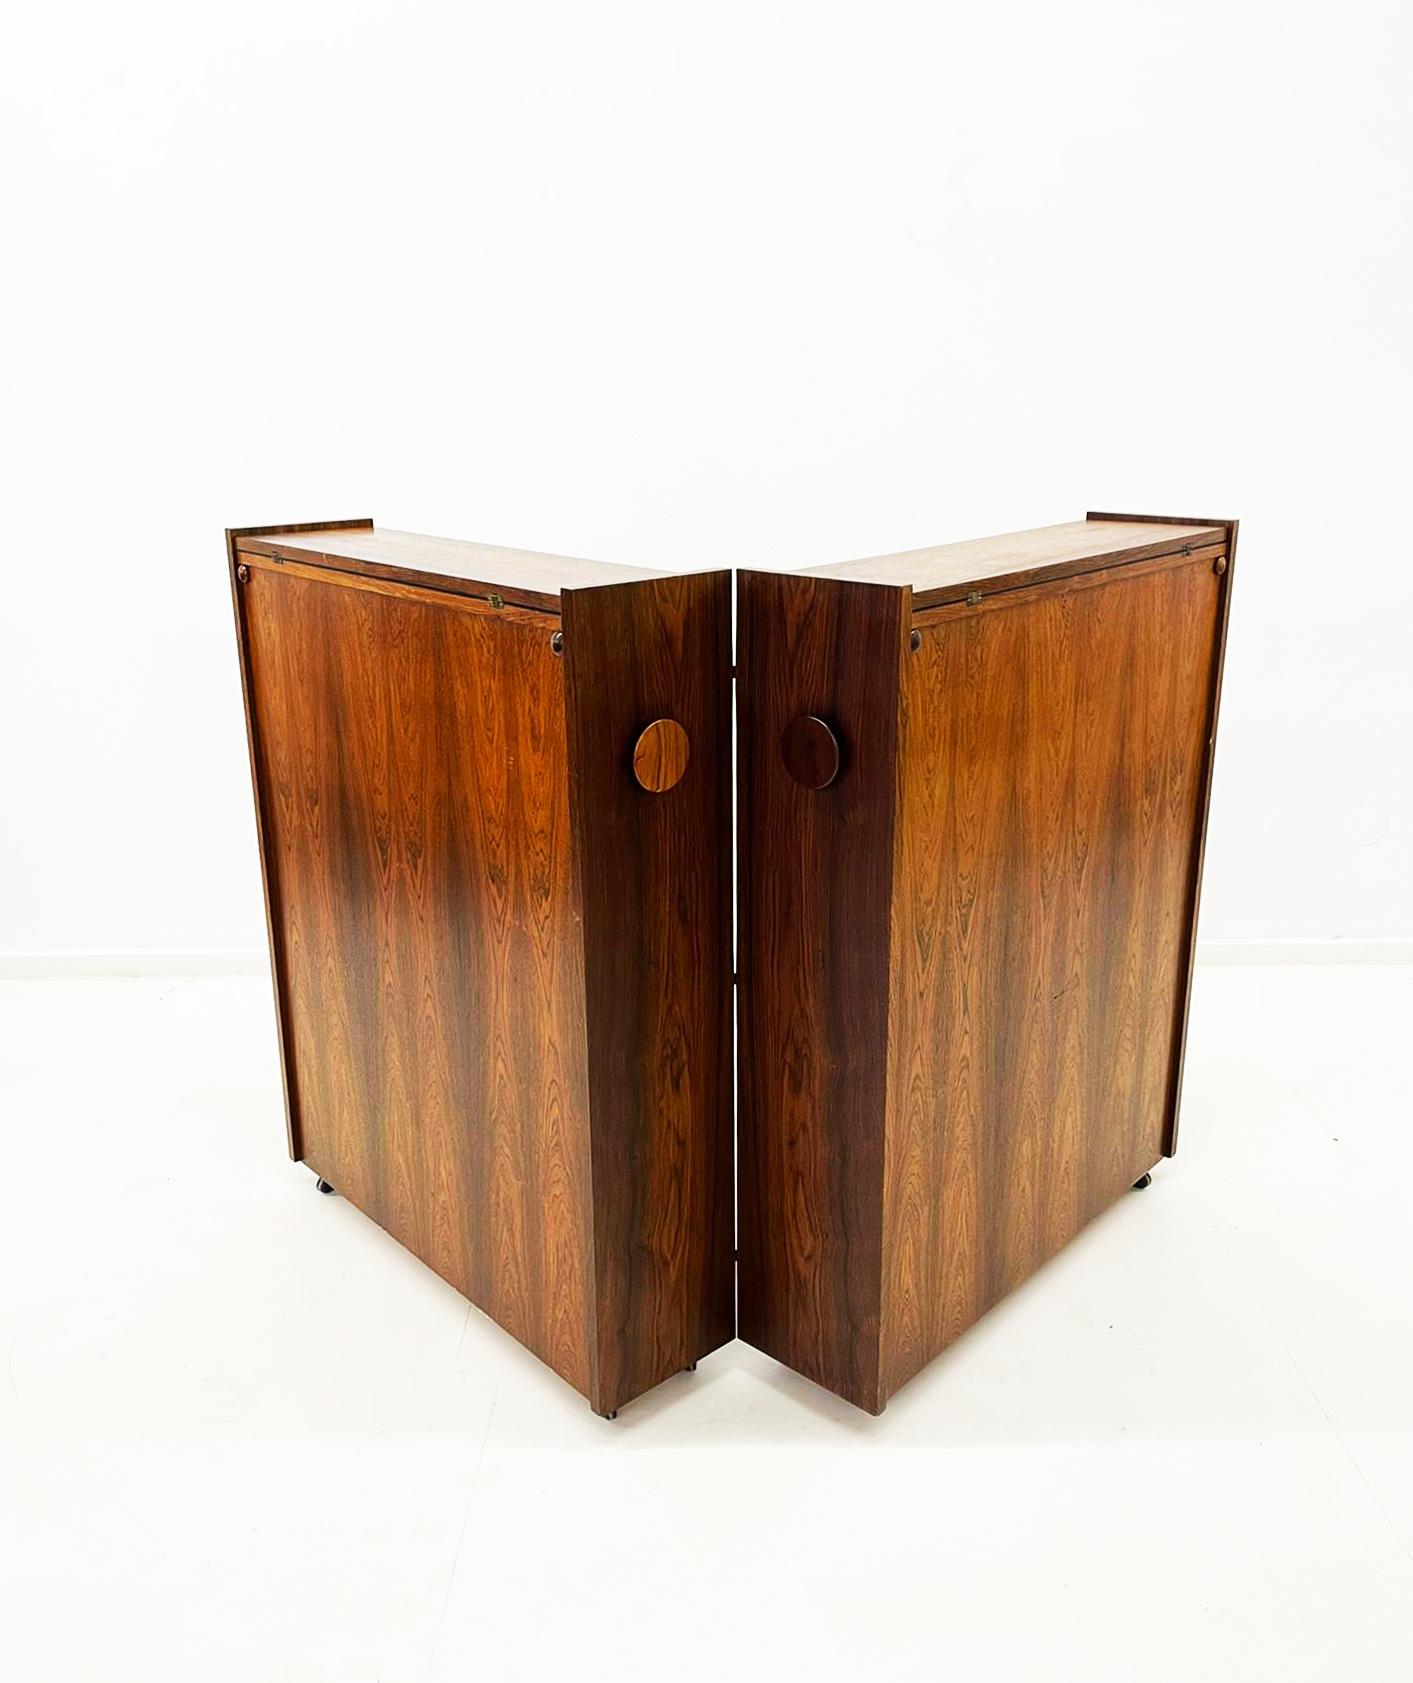 Danish folding Bar Cabinet by Erik Buch for Dyrlund is a stunning piece of furniture that combines functional design with elegant simplicity. Made from high-quality rosewood, this bar cabinet features a unique folding design that allows it to be